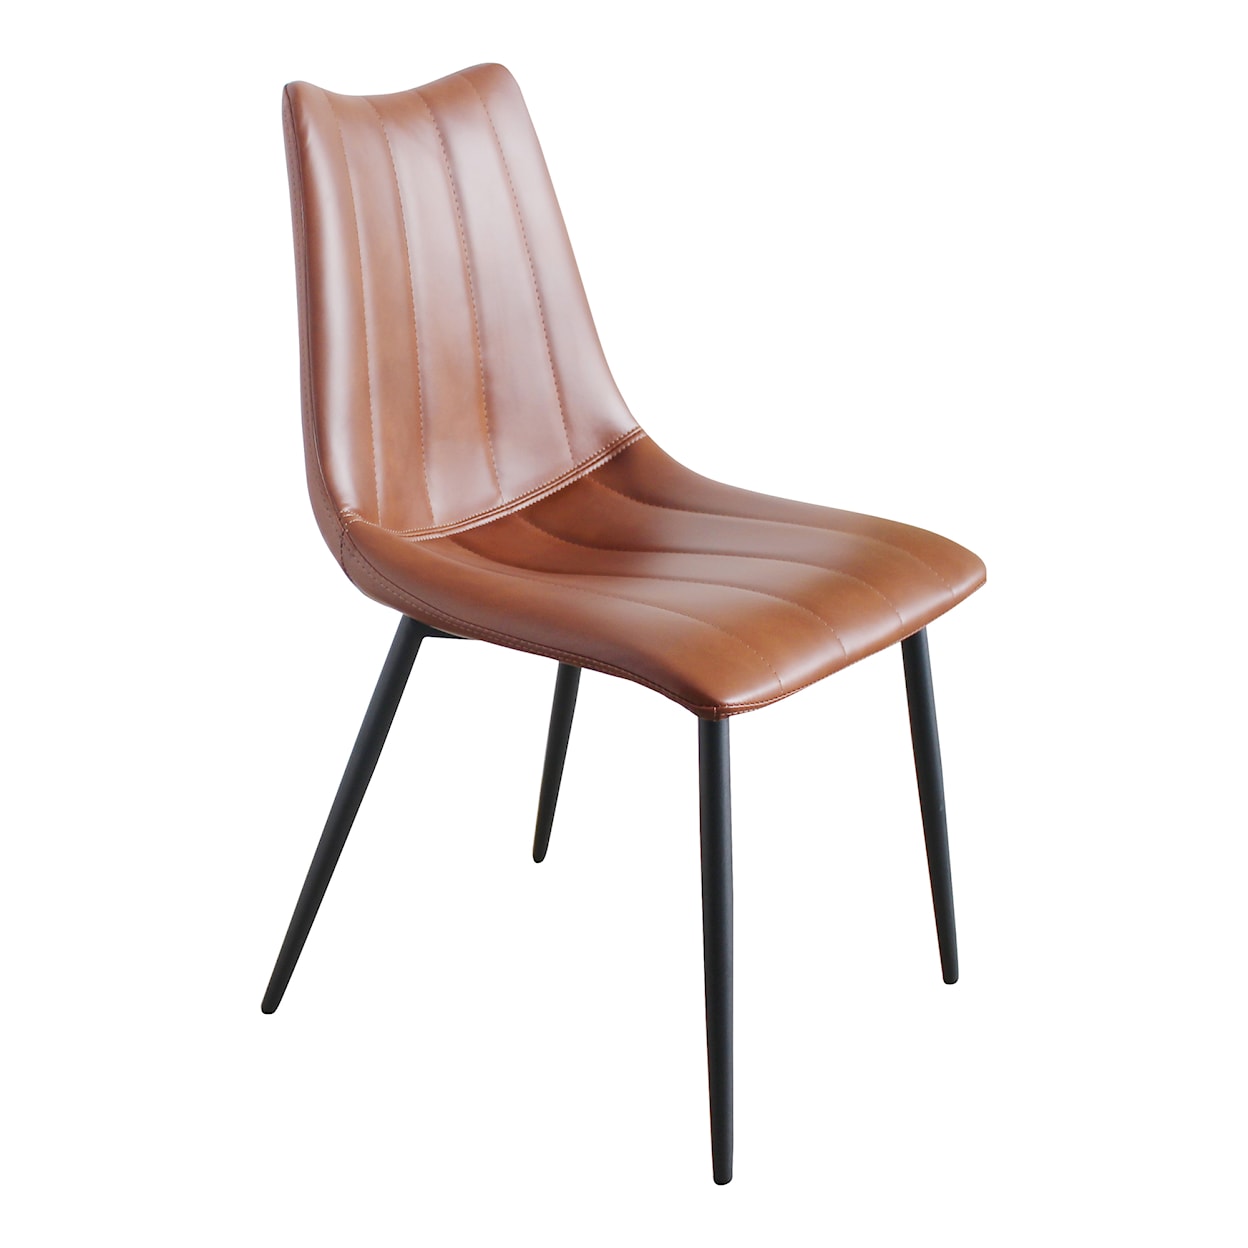 Moe's Home Collection Alibi Alibi Dining Chair Brown-M2